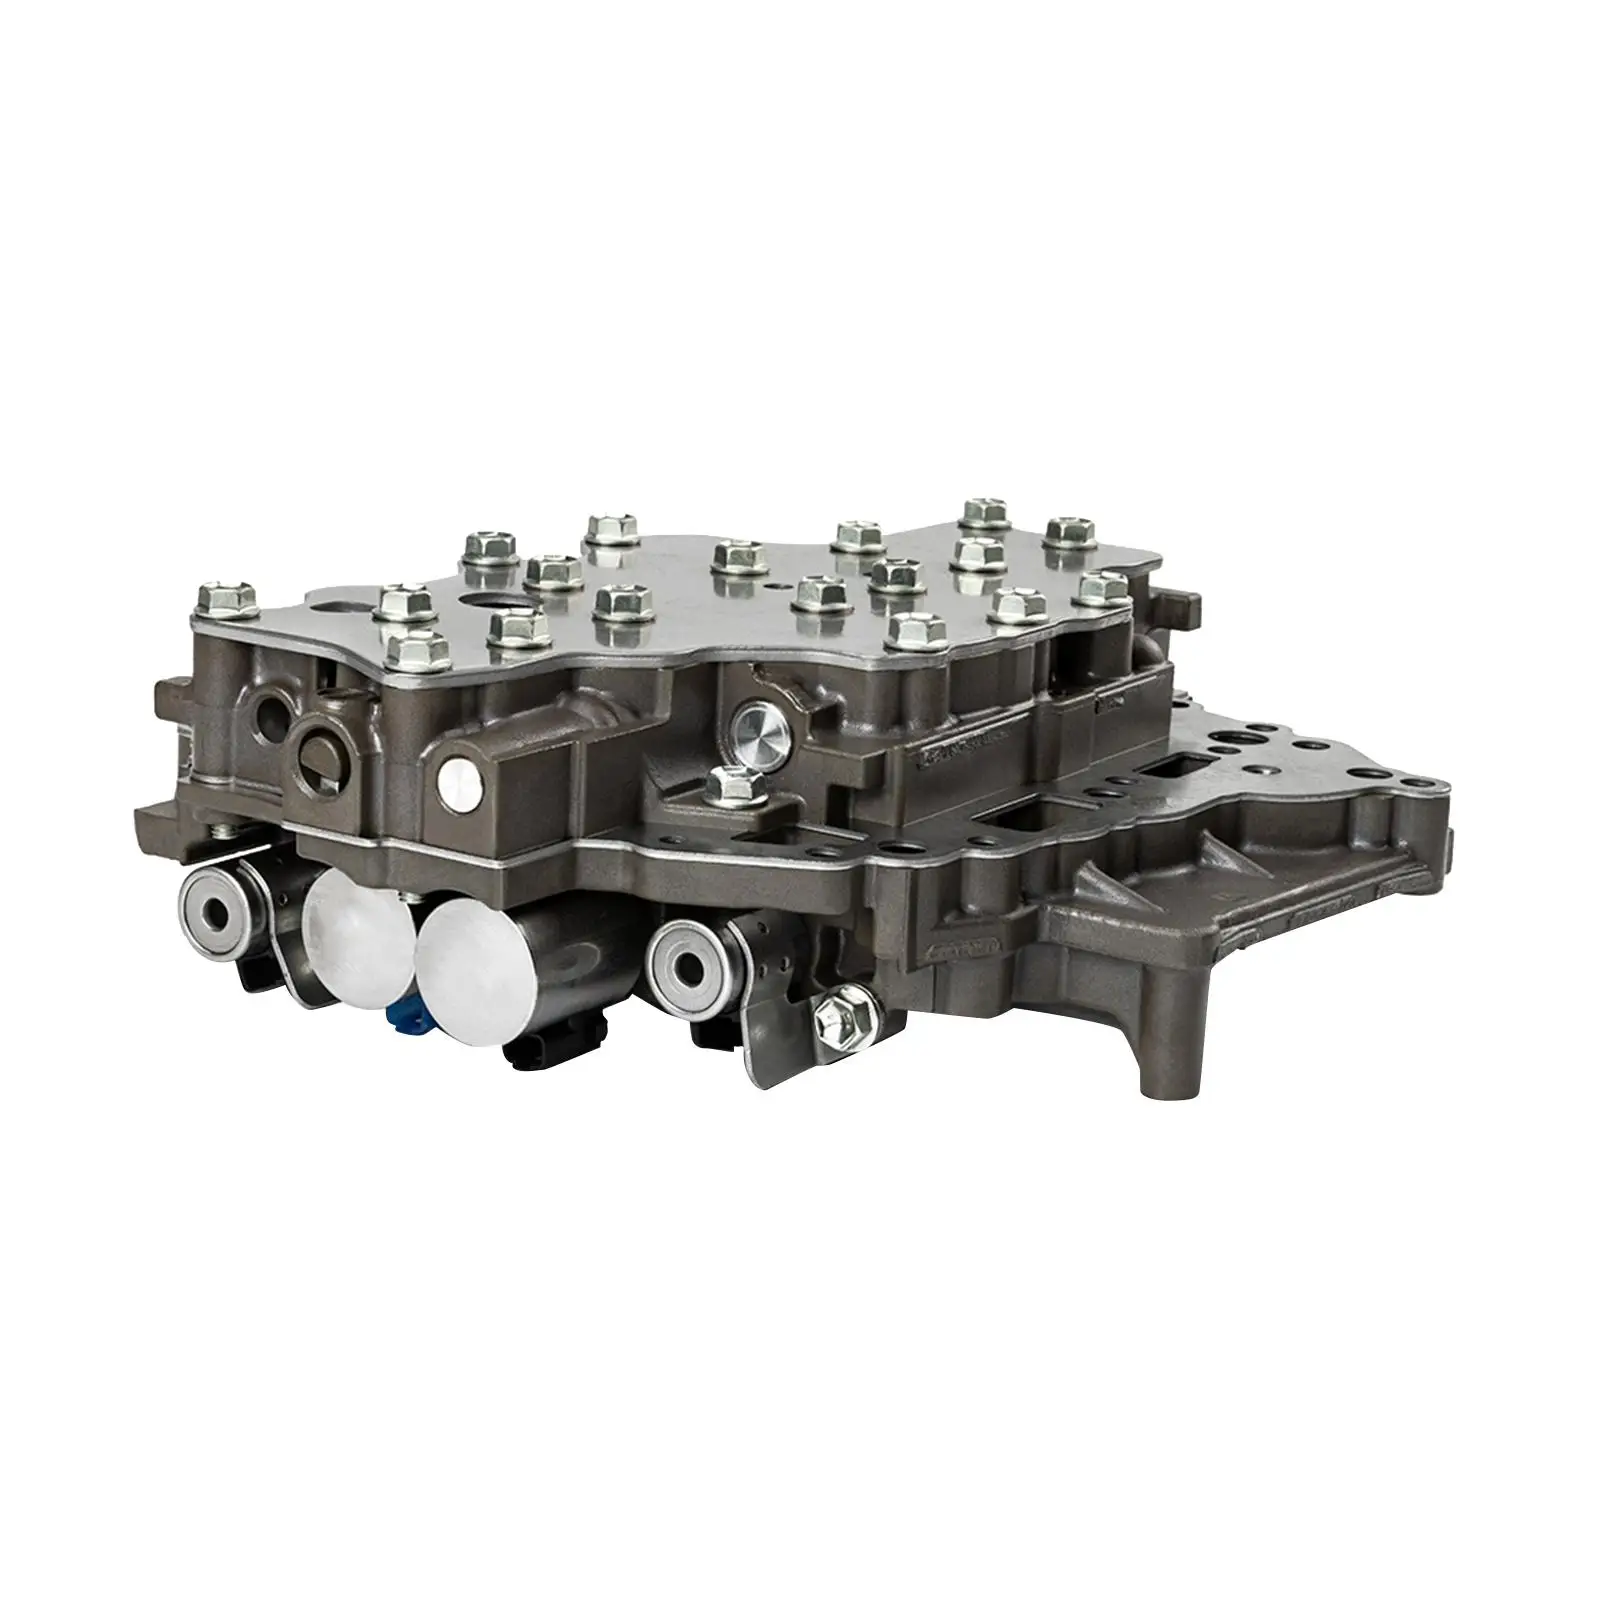 Automatic Transmission Gearbox Valve Body K313 for  Allion1.2L Wish15 to - £504.79 GBP